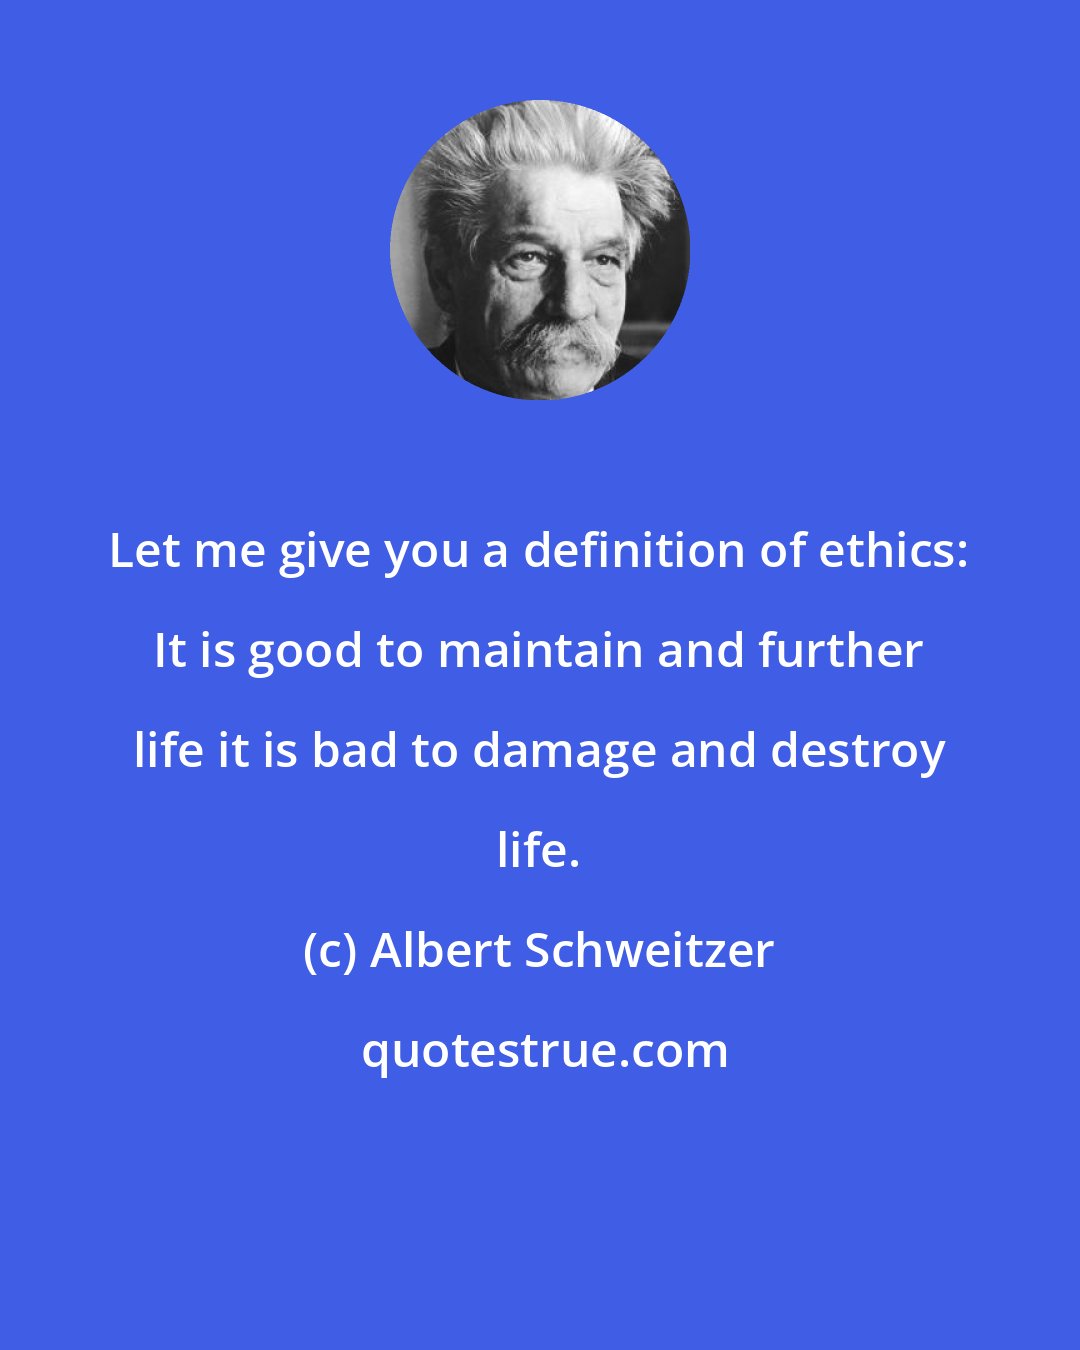 Albert Schweitzer: Let me give you a definition of ethics: It is good to maintain and further life it is bad to damage and destroy life.